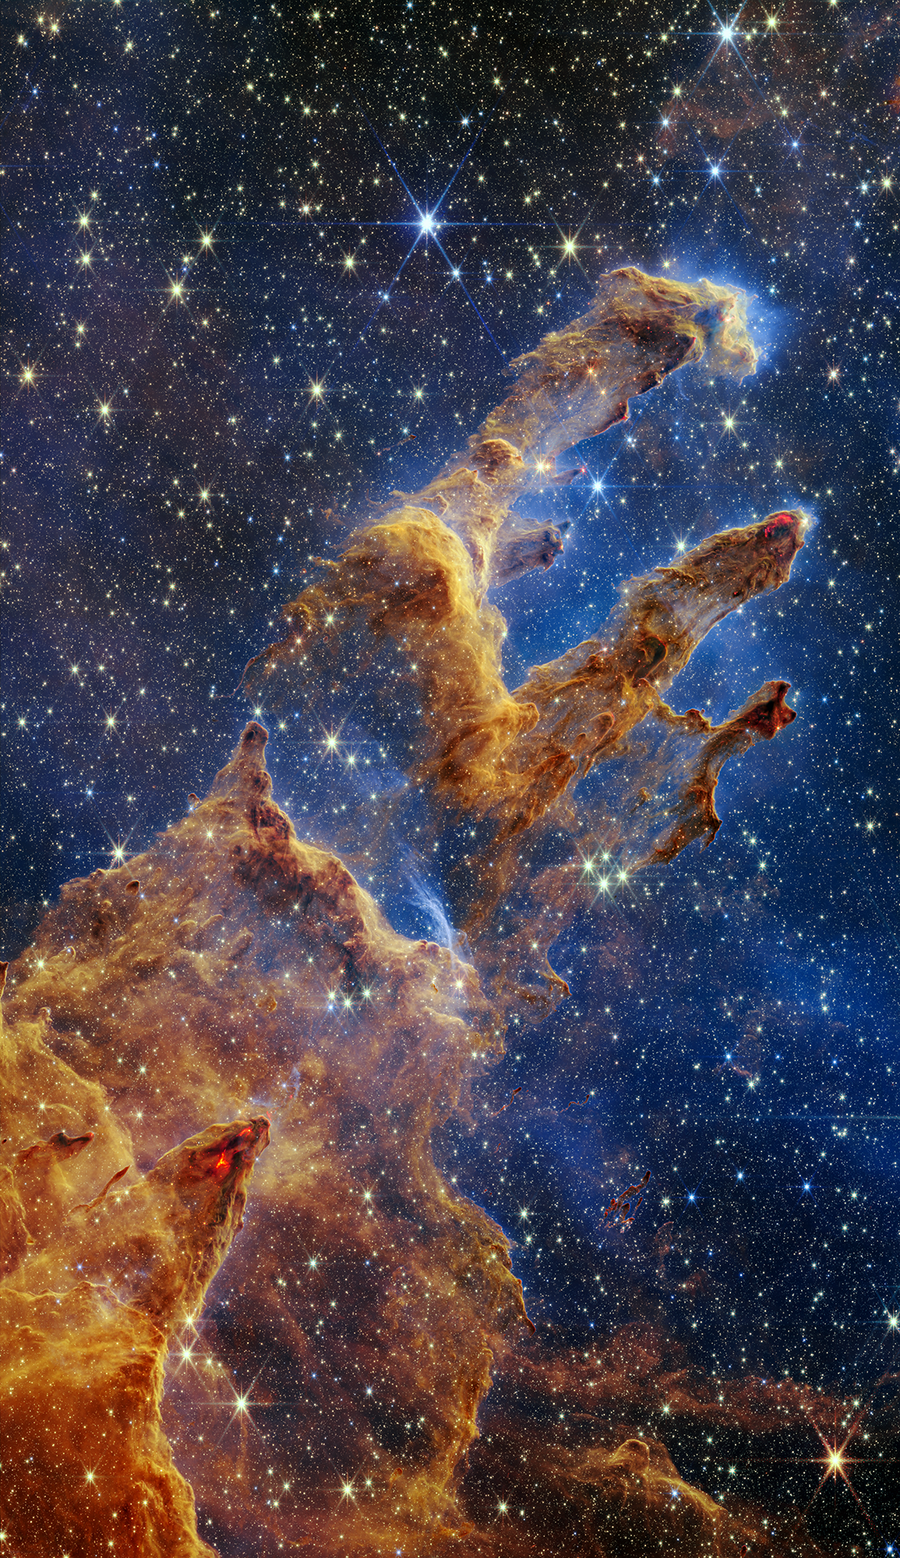 The Pillars of Creation are set off in a kaleidoscope of color in NASA's James Webb Space Telescope's near-infrared-light view. The pillars look like arches and spires rising out of a desert landscape, but are filled with semi-transparent gas and dust, and ever changing. This is a region where young stars are forming – or have barely burst from their dusty cocoons as they continue to form.